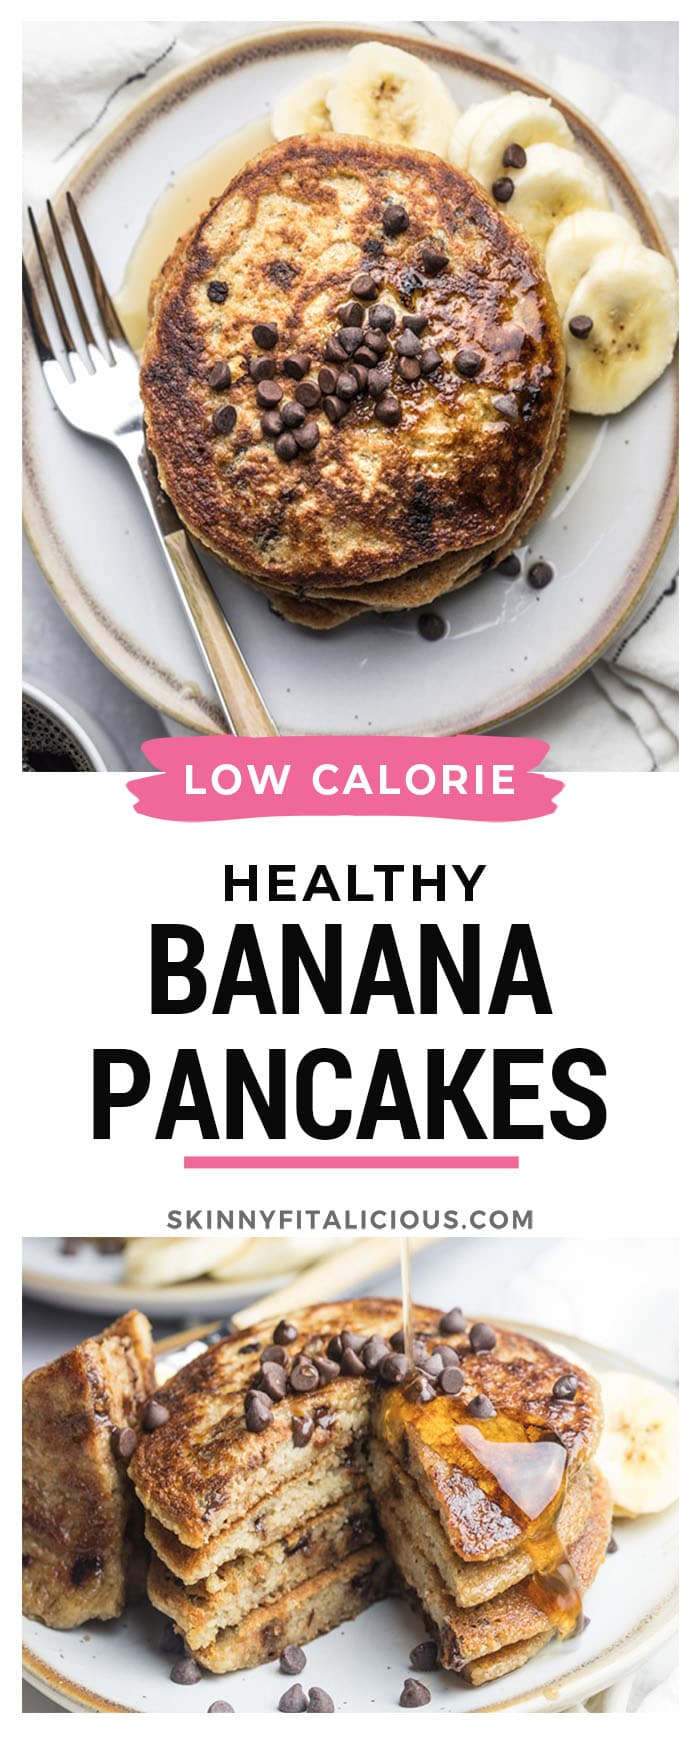 Mint Banana Chocolate Chip Pancakes are egg free, low calorie and high fiber! Made with gluten free ingredients and no added sugar. Perfect for breakfast, brunch or a treat!